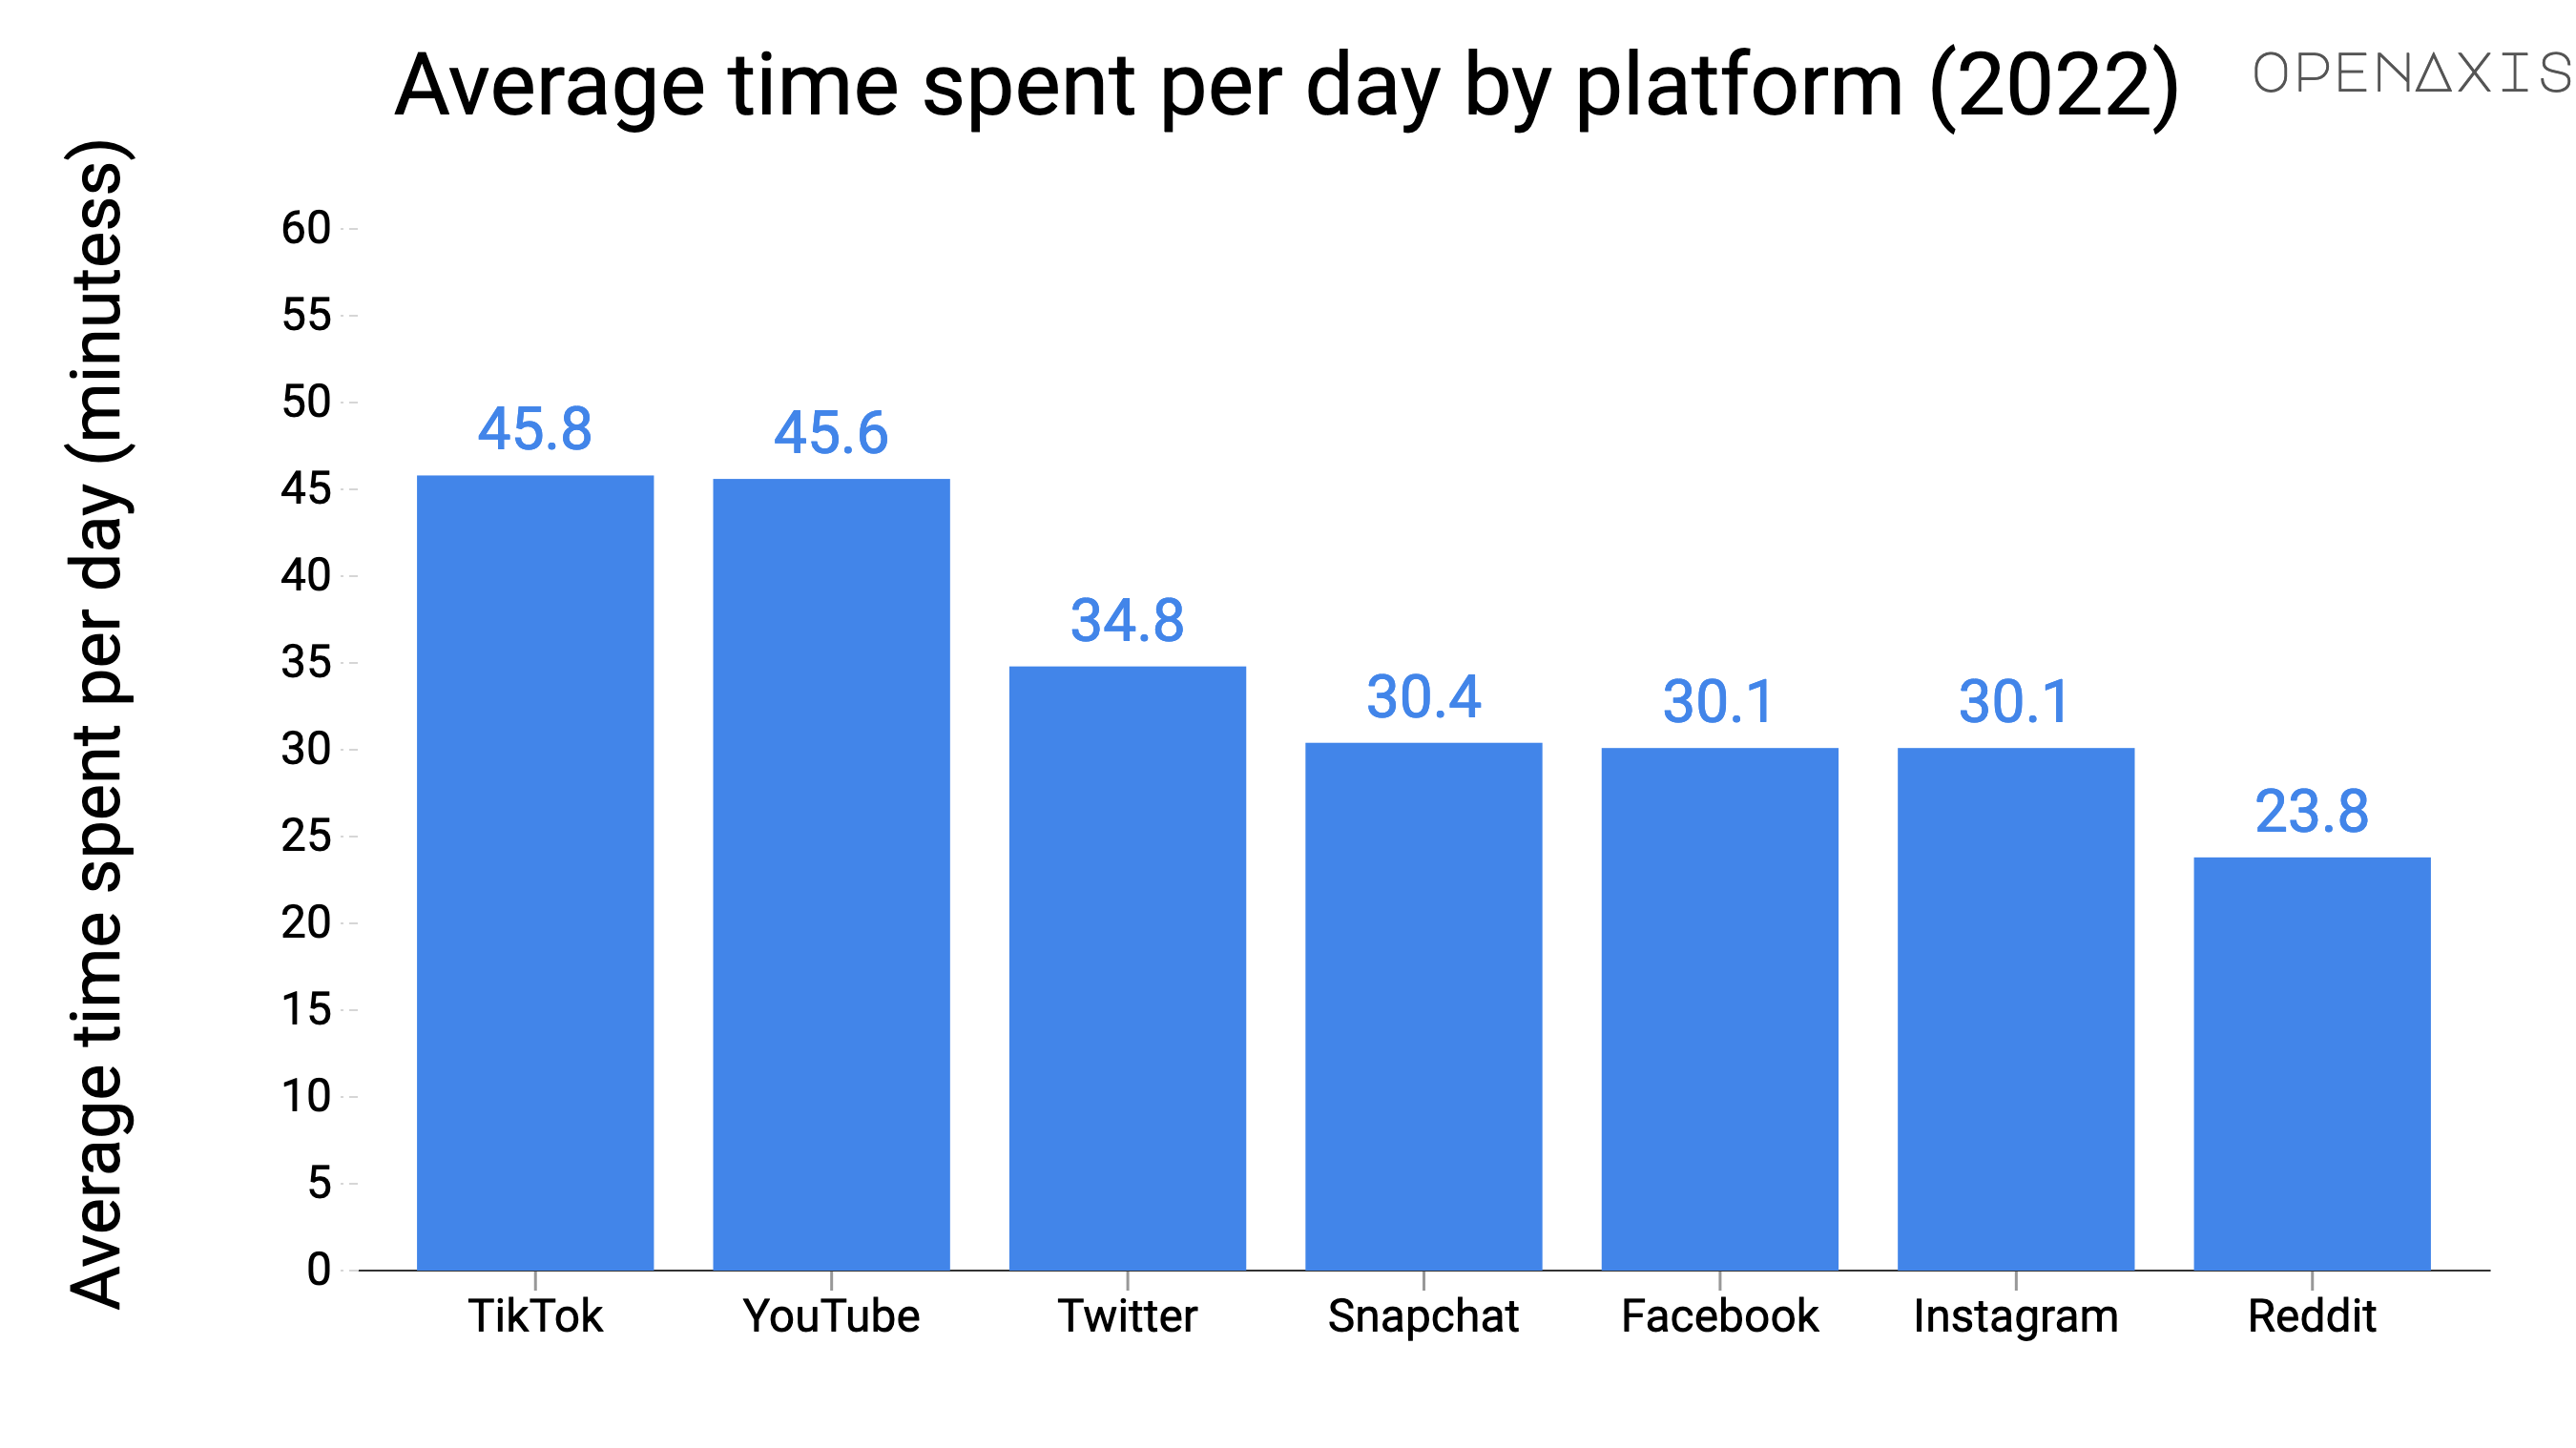 "Average time spent per day by platform (2022)"